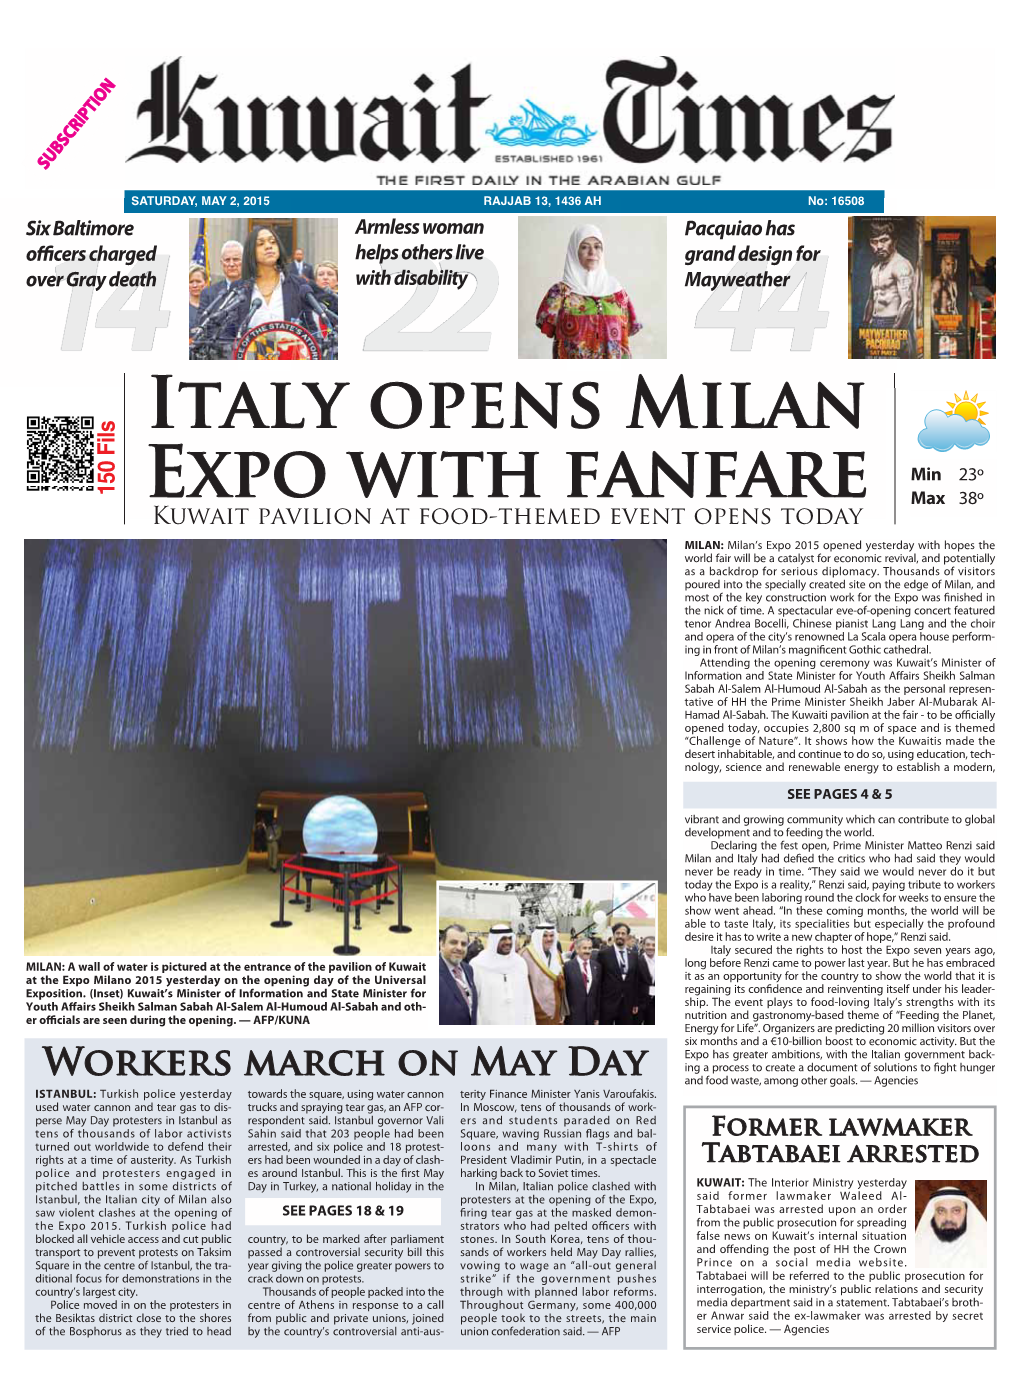 Italy Opens Milan Expo with Fanfare